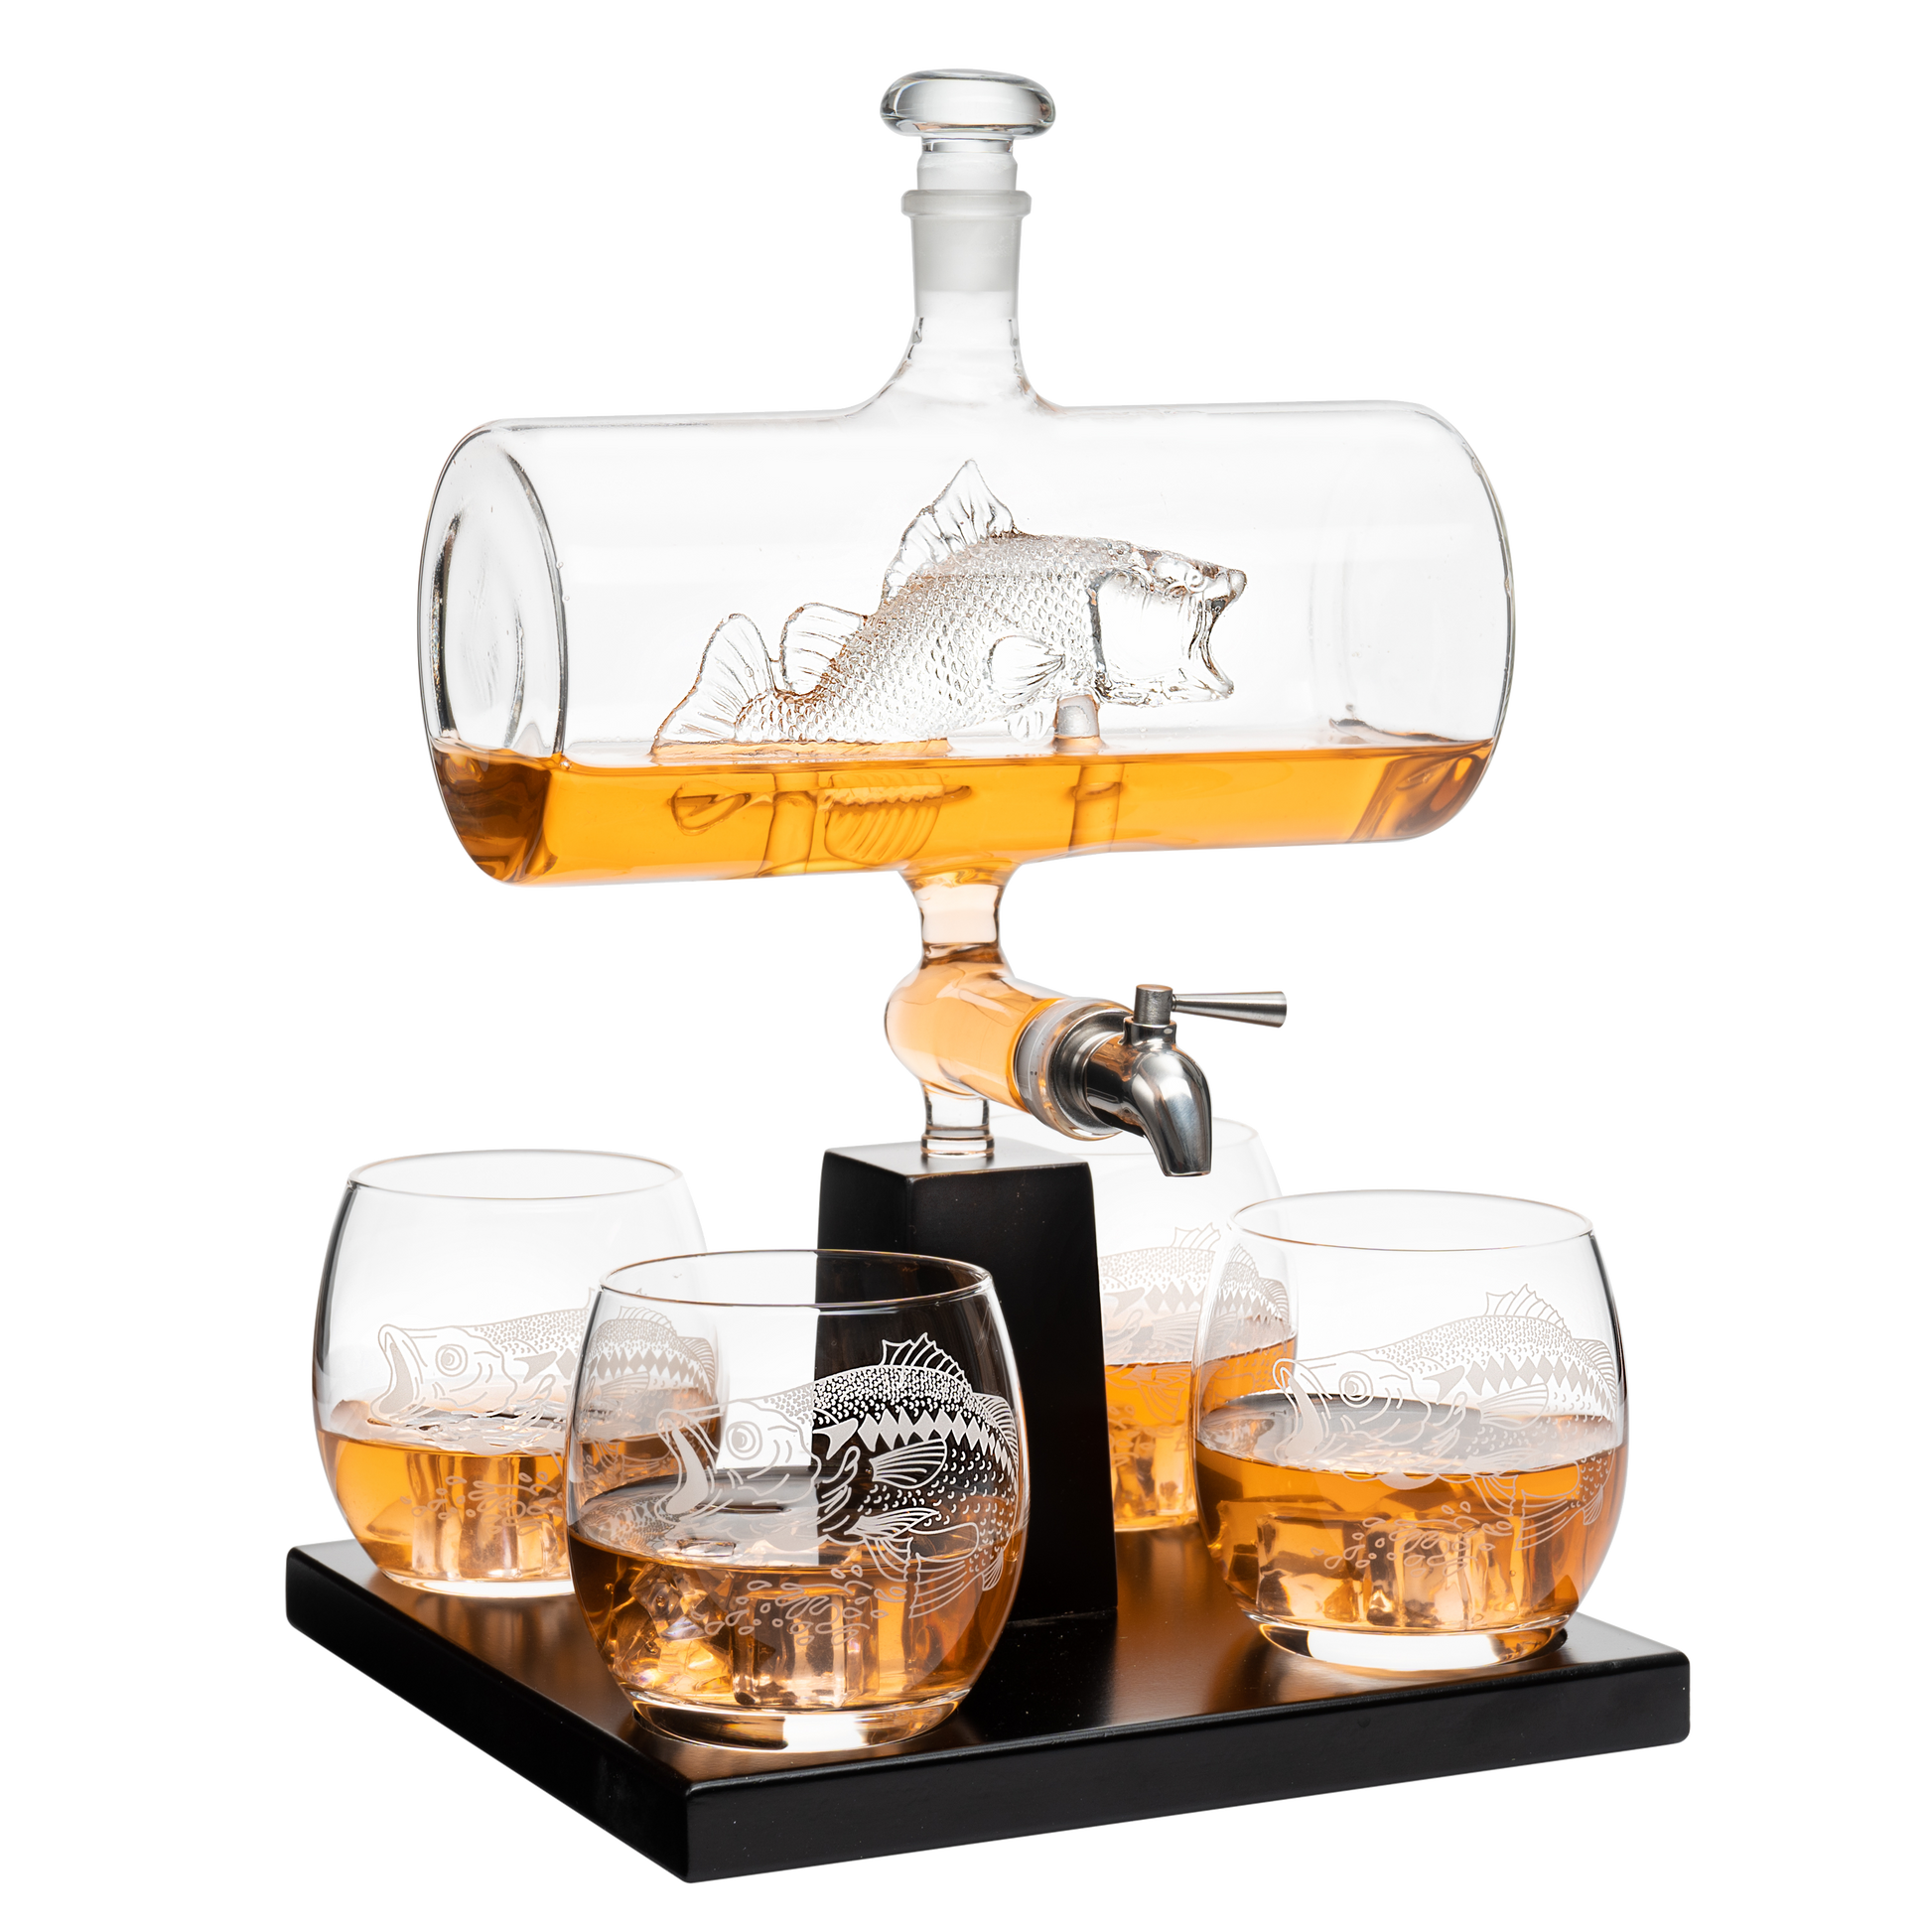 Bass Fish Wine & Whiskey Decanter Set 1100ml by The Wine Savant with 4 Bass Whiskey Glasses, Fishing Gifts, Fisherman Gifts, Boating Gifts, Drink Dispenser Scotch, Bourbon,Gifts for Dad-0